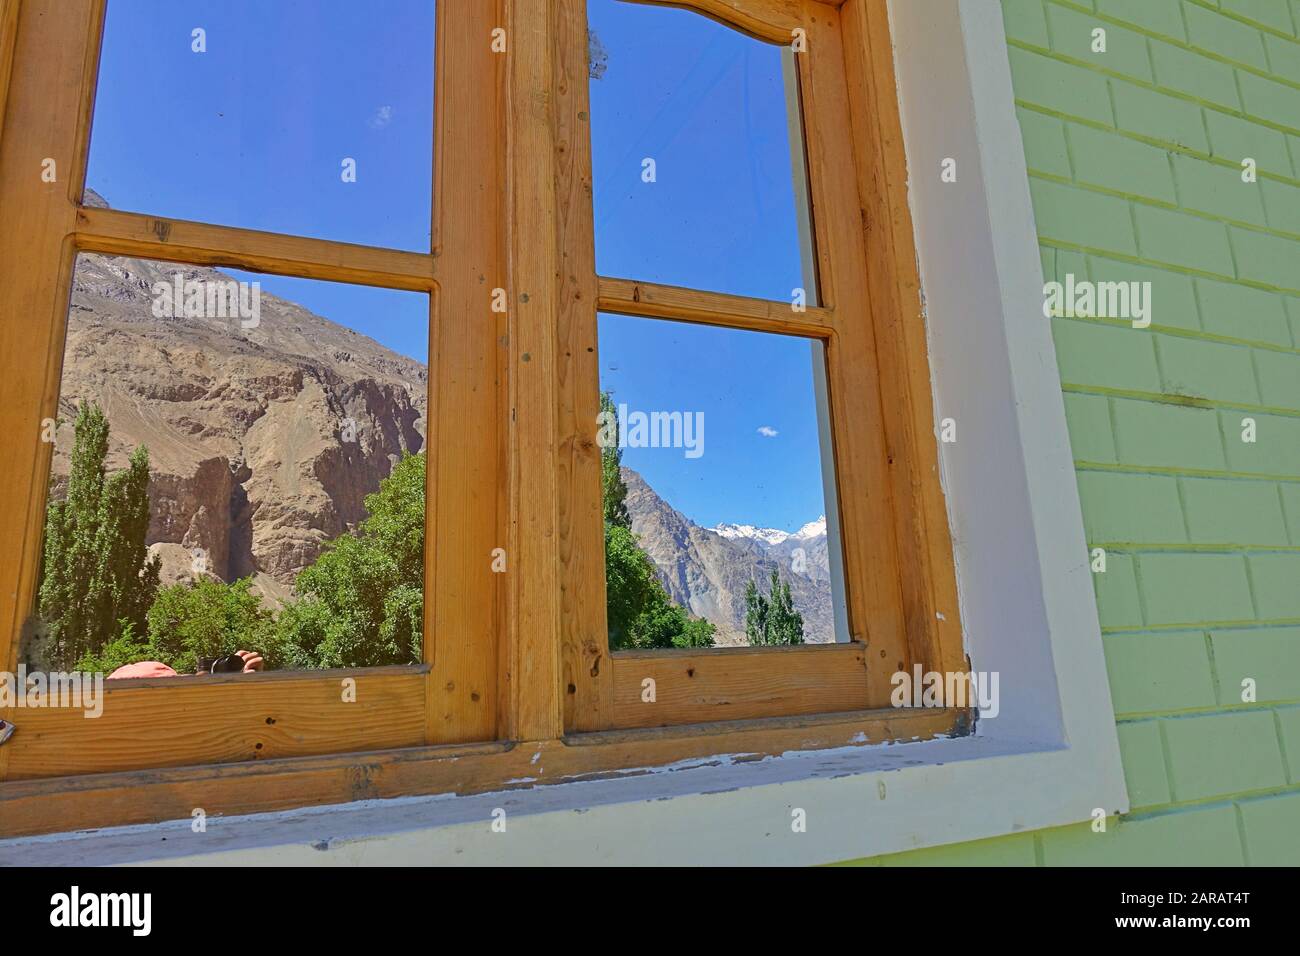 Reflection of Turtuk village and Himalayan mountains in old Window - Leh district of Ladakh, India Stock Photo